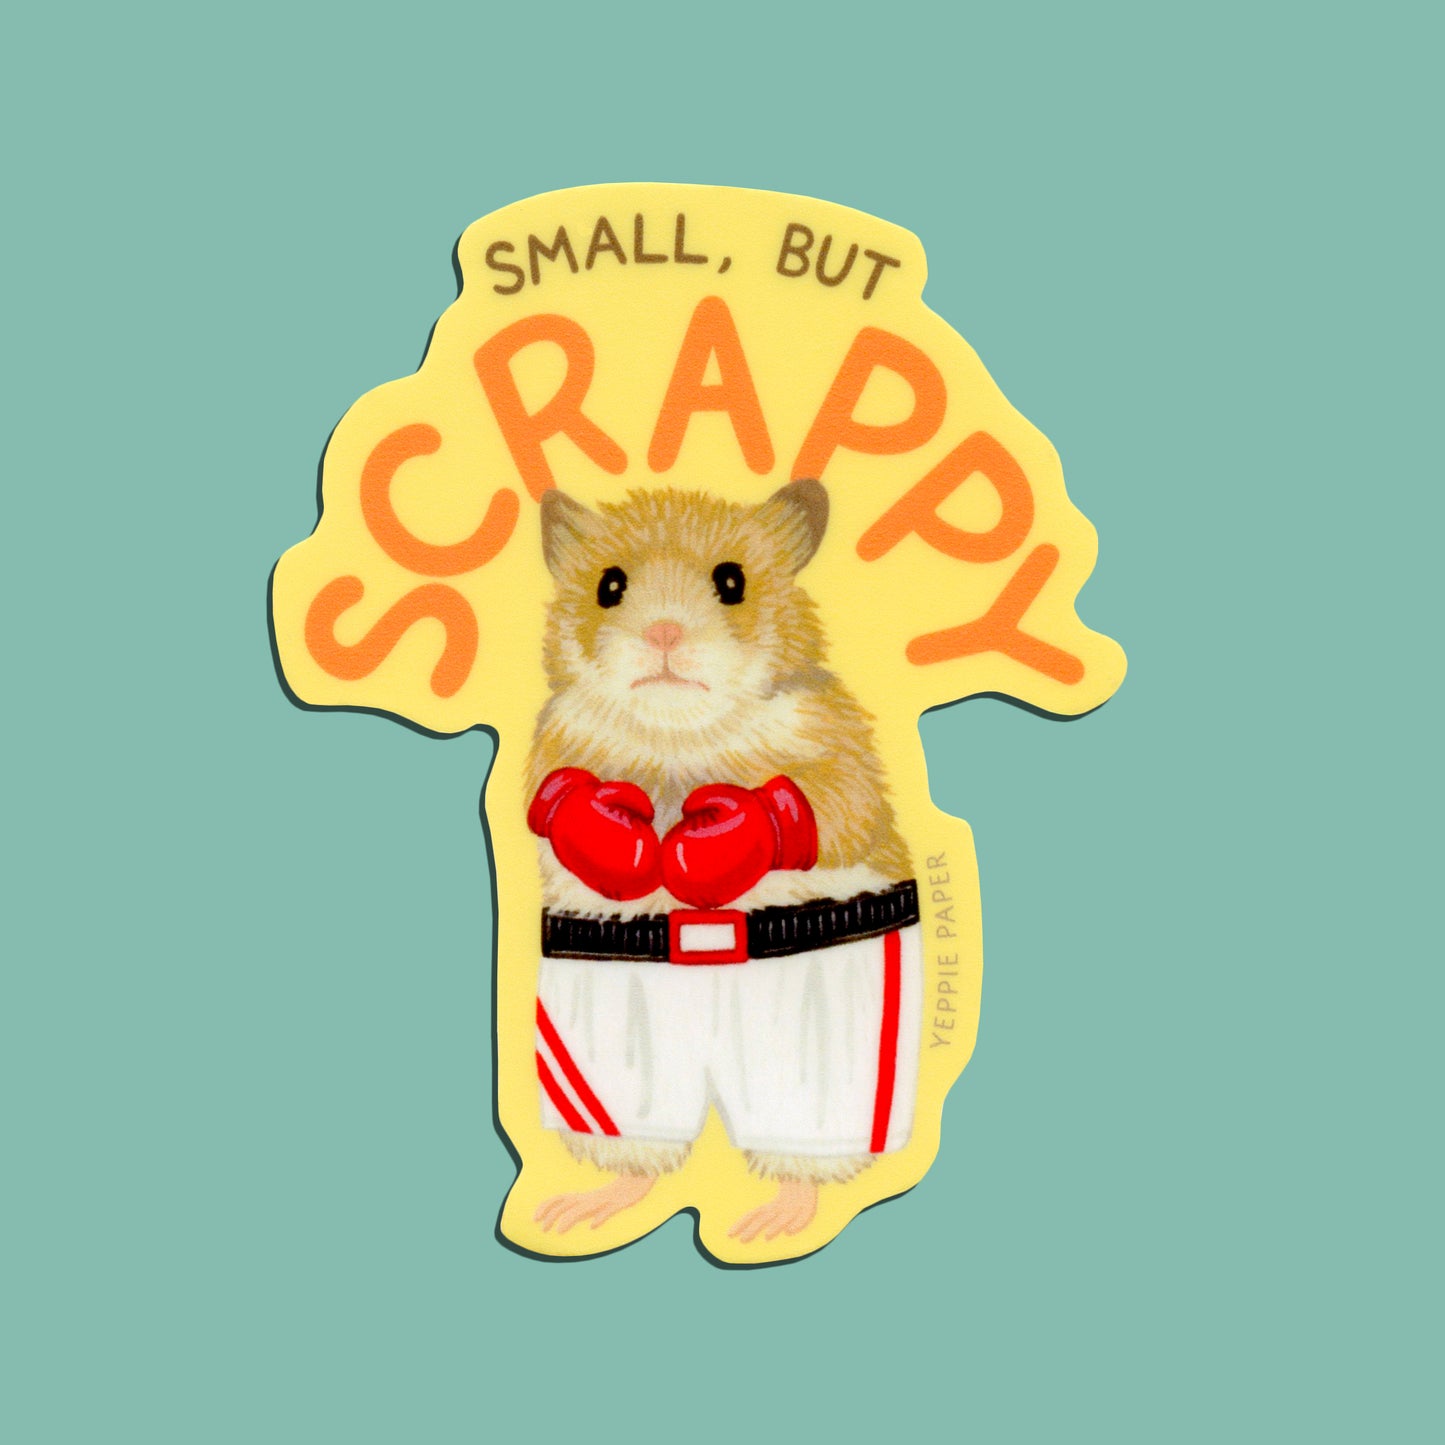 SMALL BUT SCRAPPY HAMSTER - DIE CUT STICKER